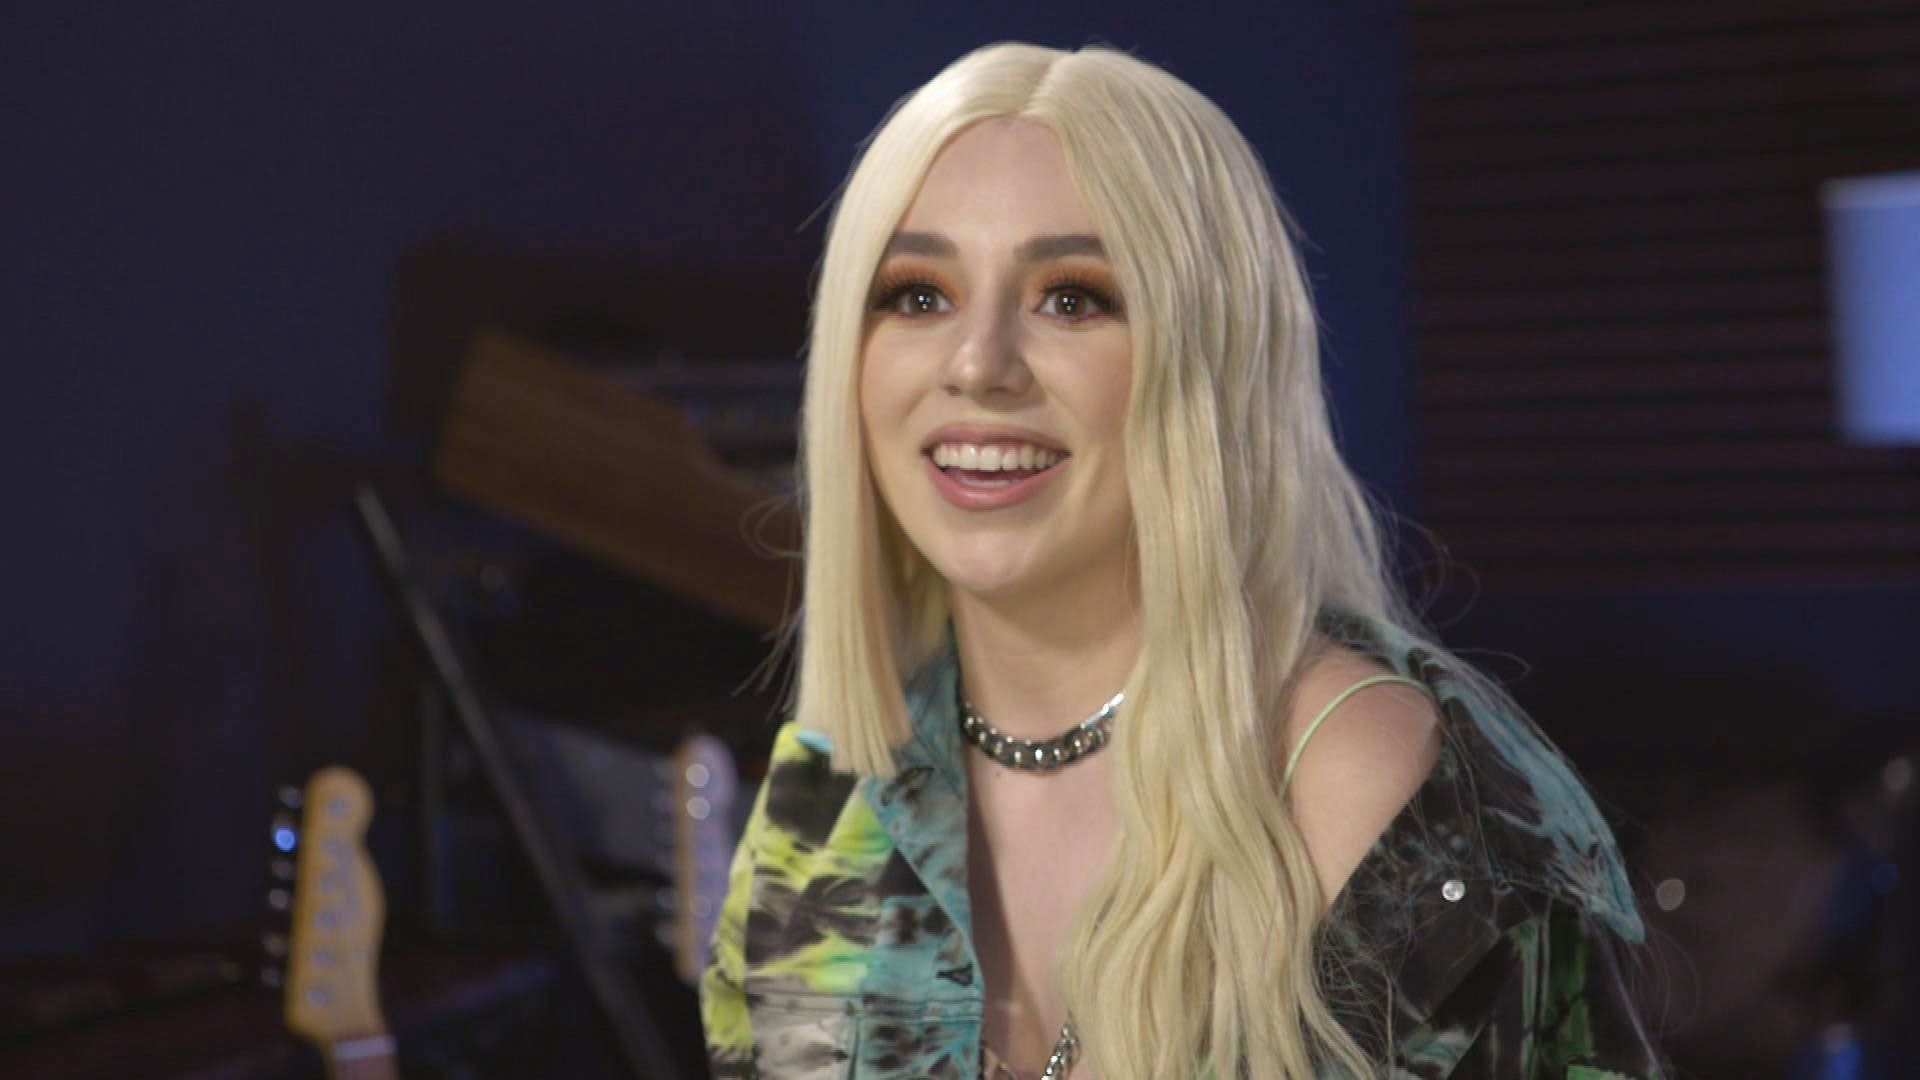 Ava Max On How Alicia Keys Changed Her Life